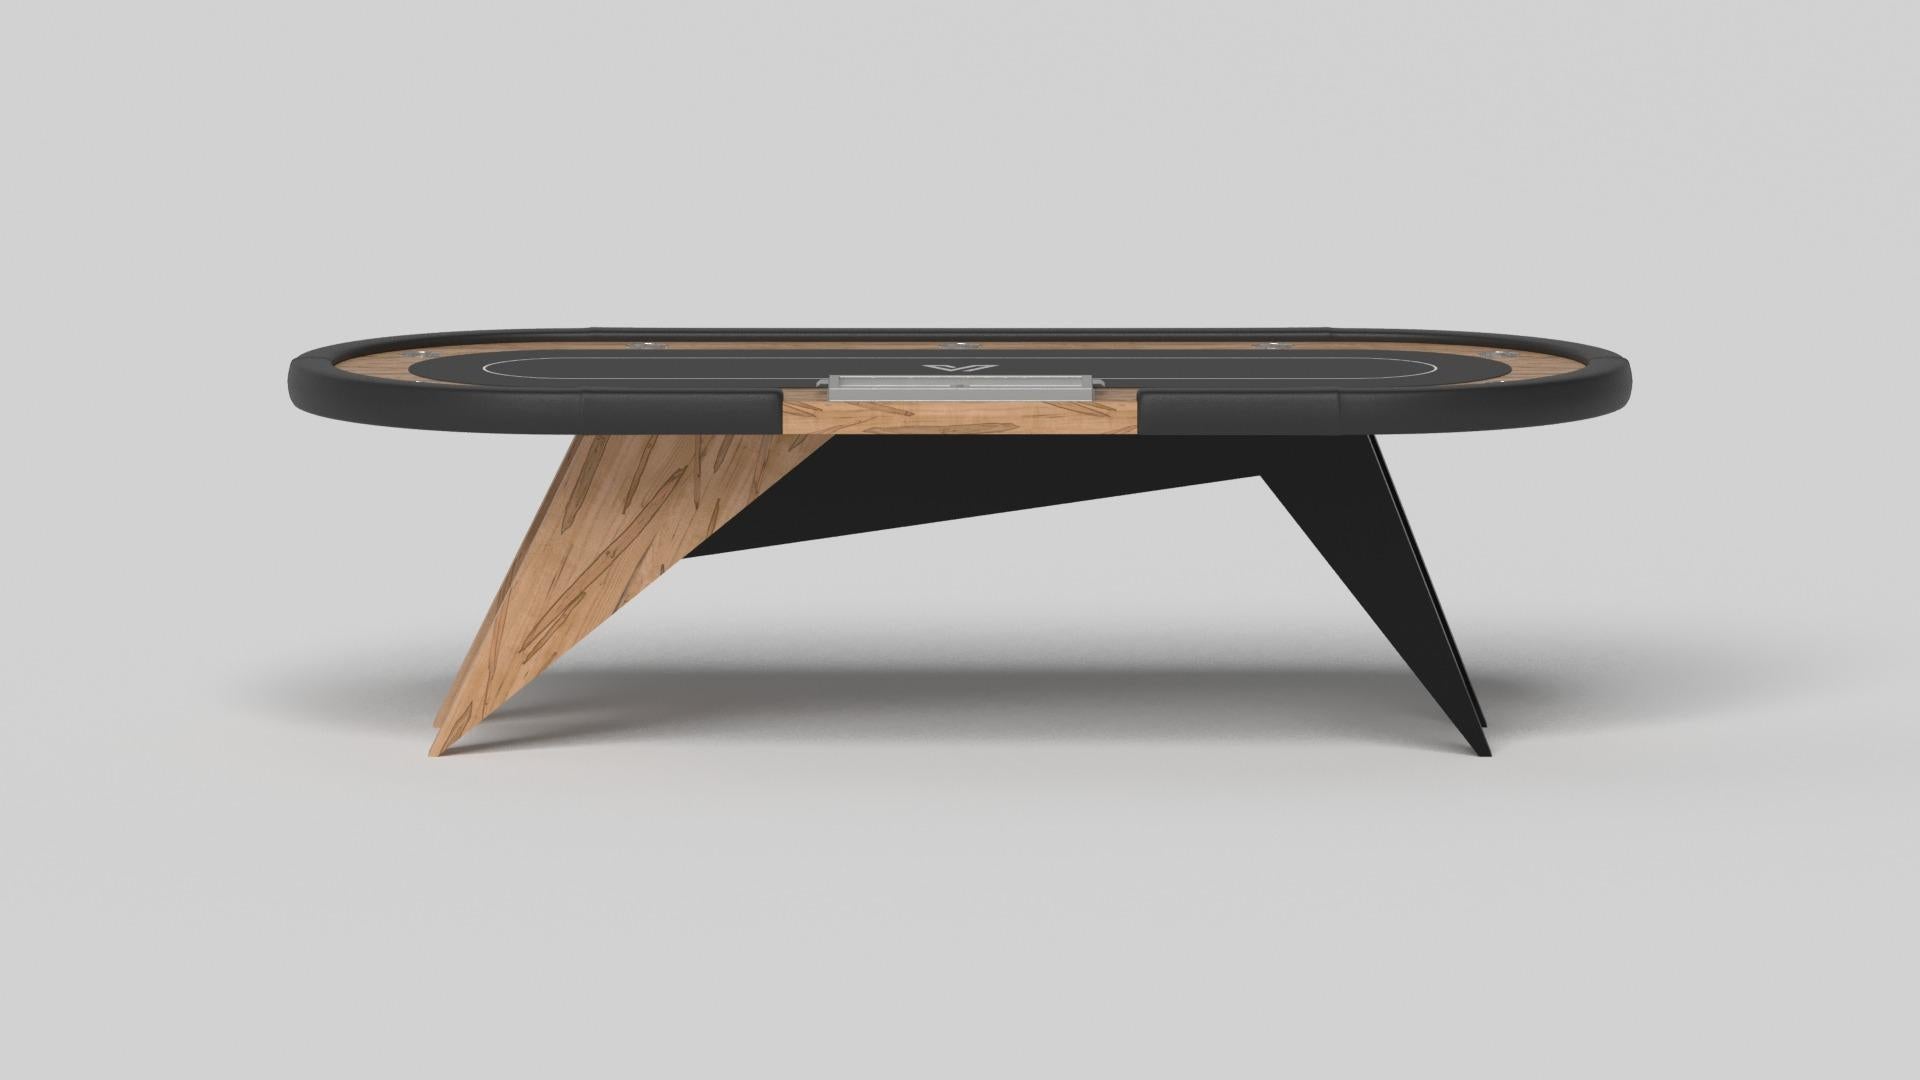 Simple yet sophisticated, the Mantis poker table puts a fresh, modern spin on a classic four-legged design. Sharp angles and tapered legs provide sleek stability.

Size:

104”X44”X30”
Custom Sizes Available Per Request
Custom Table-Top Shapes